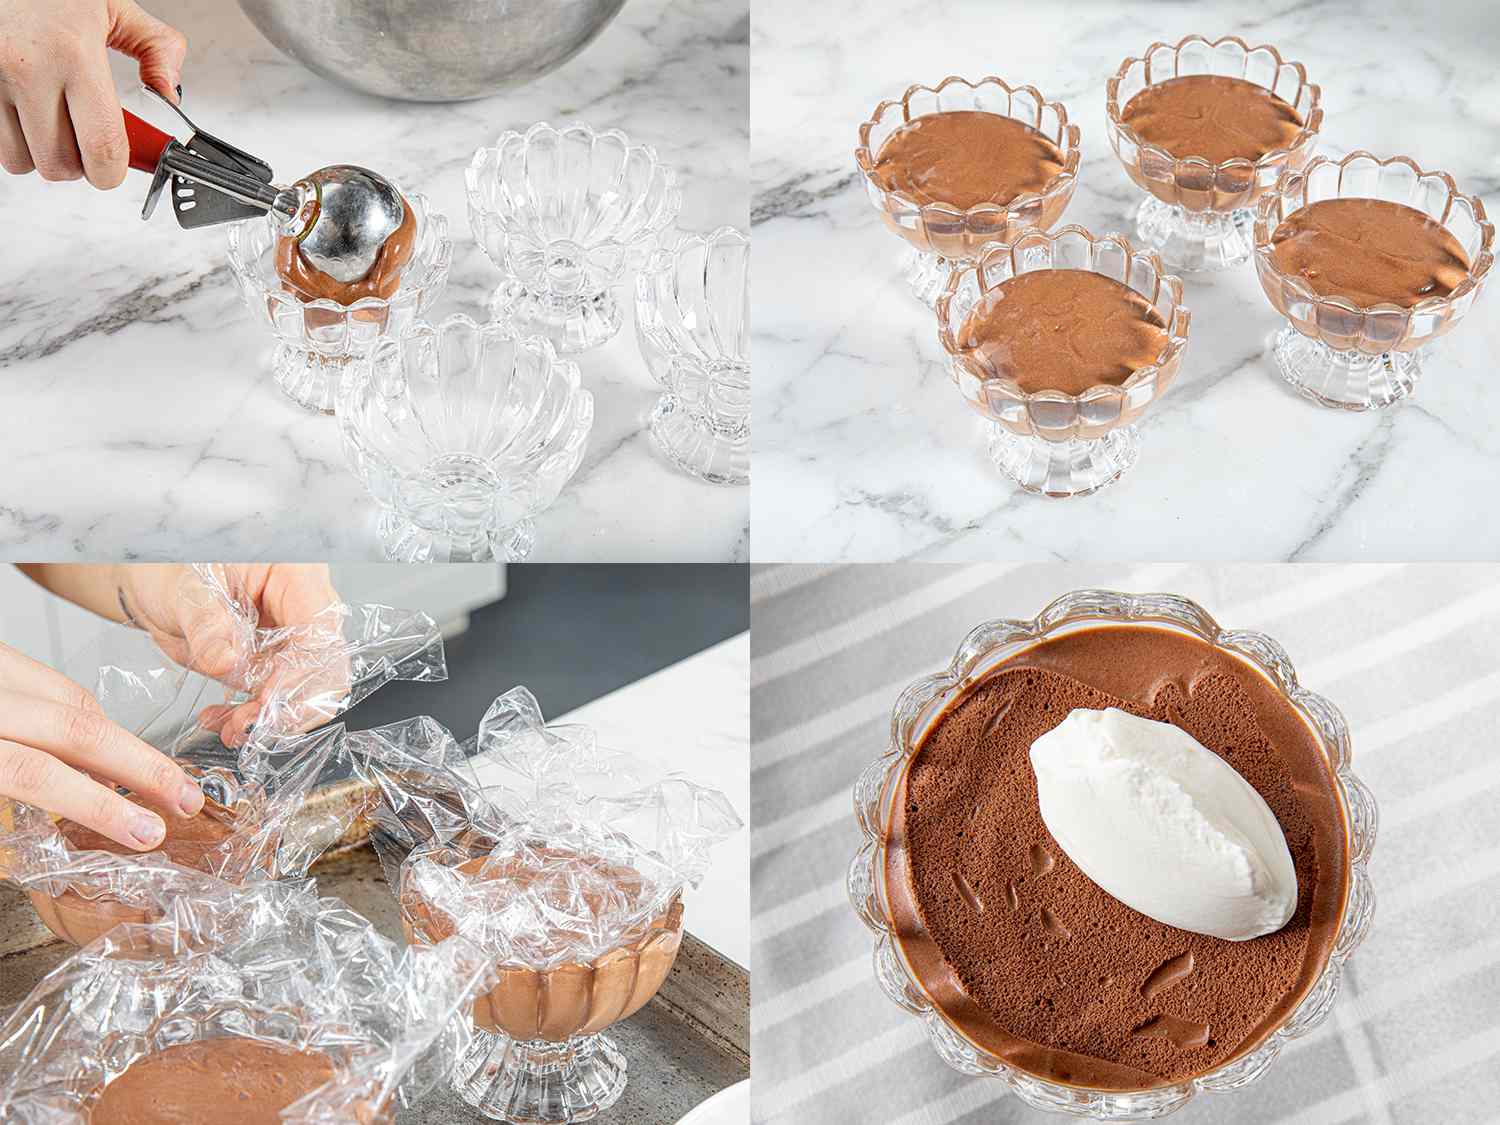 Four image collage of scooping mousse into ramekins, four ramekins ready to be refrigerated and then covered in plastic, and finished chocolate mouse topped with whipped cream